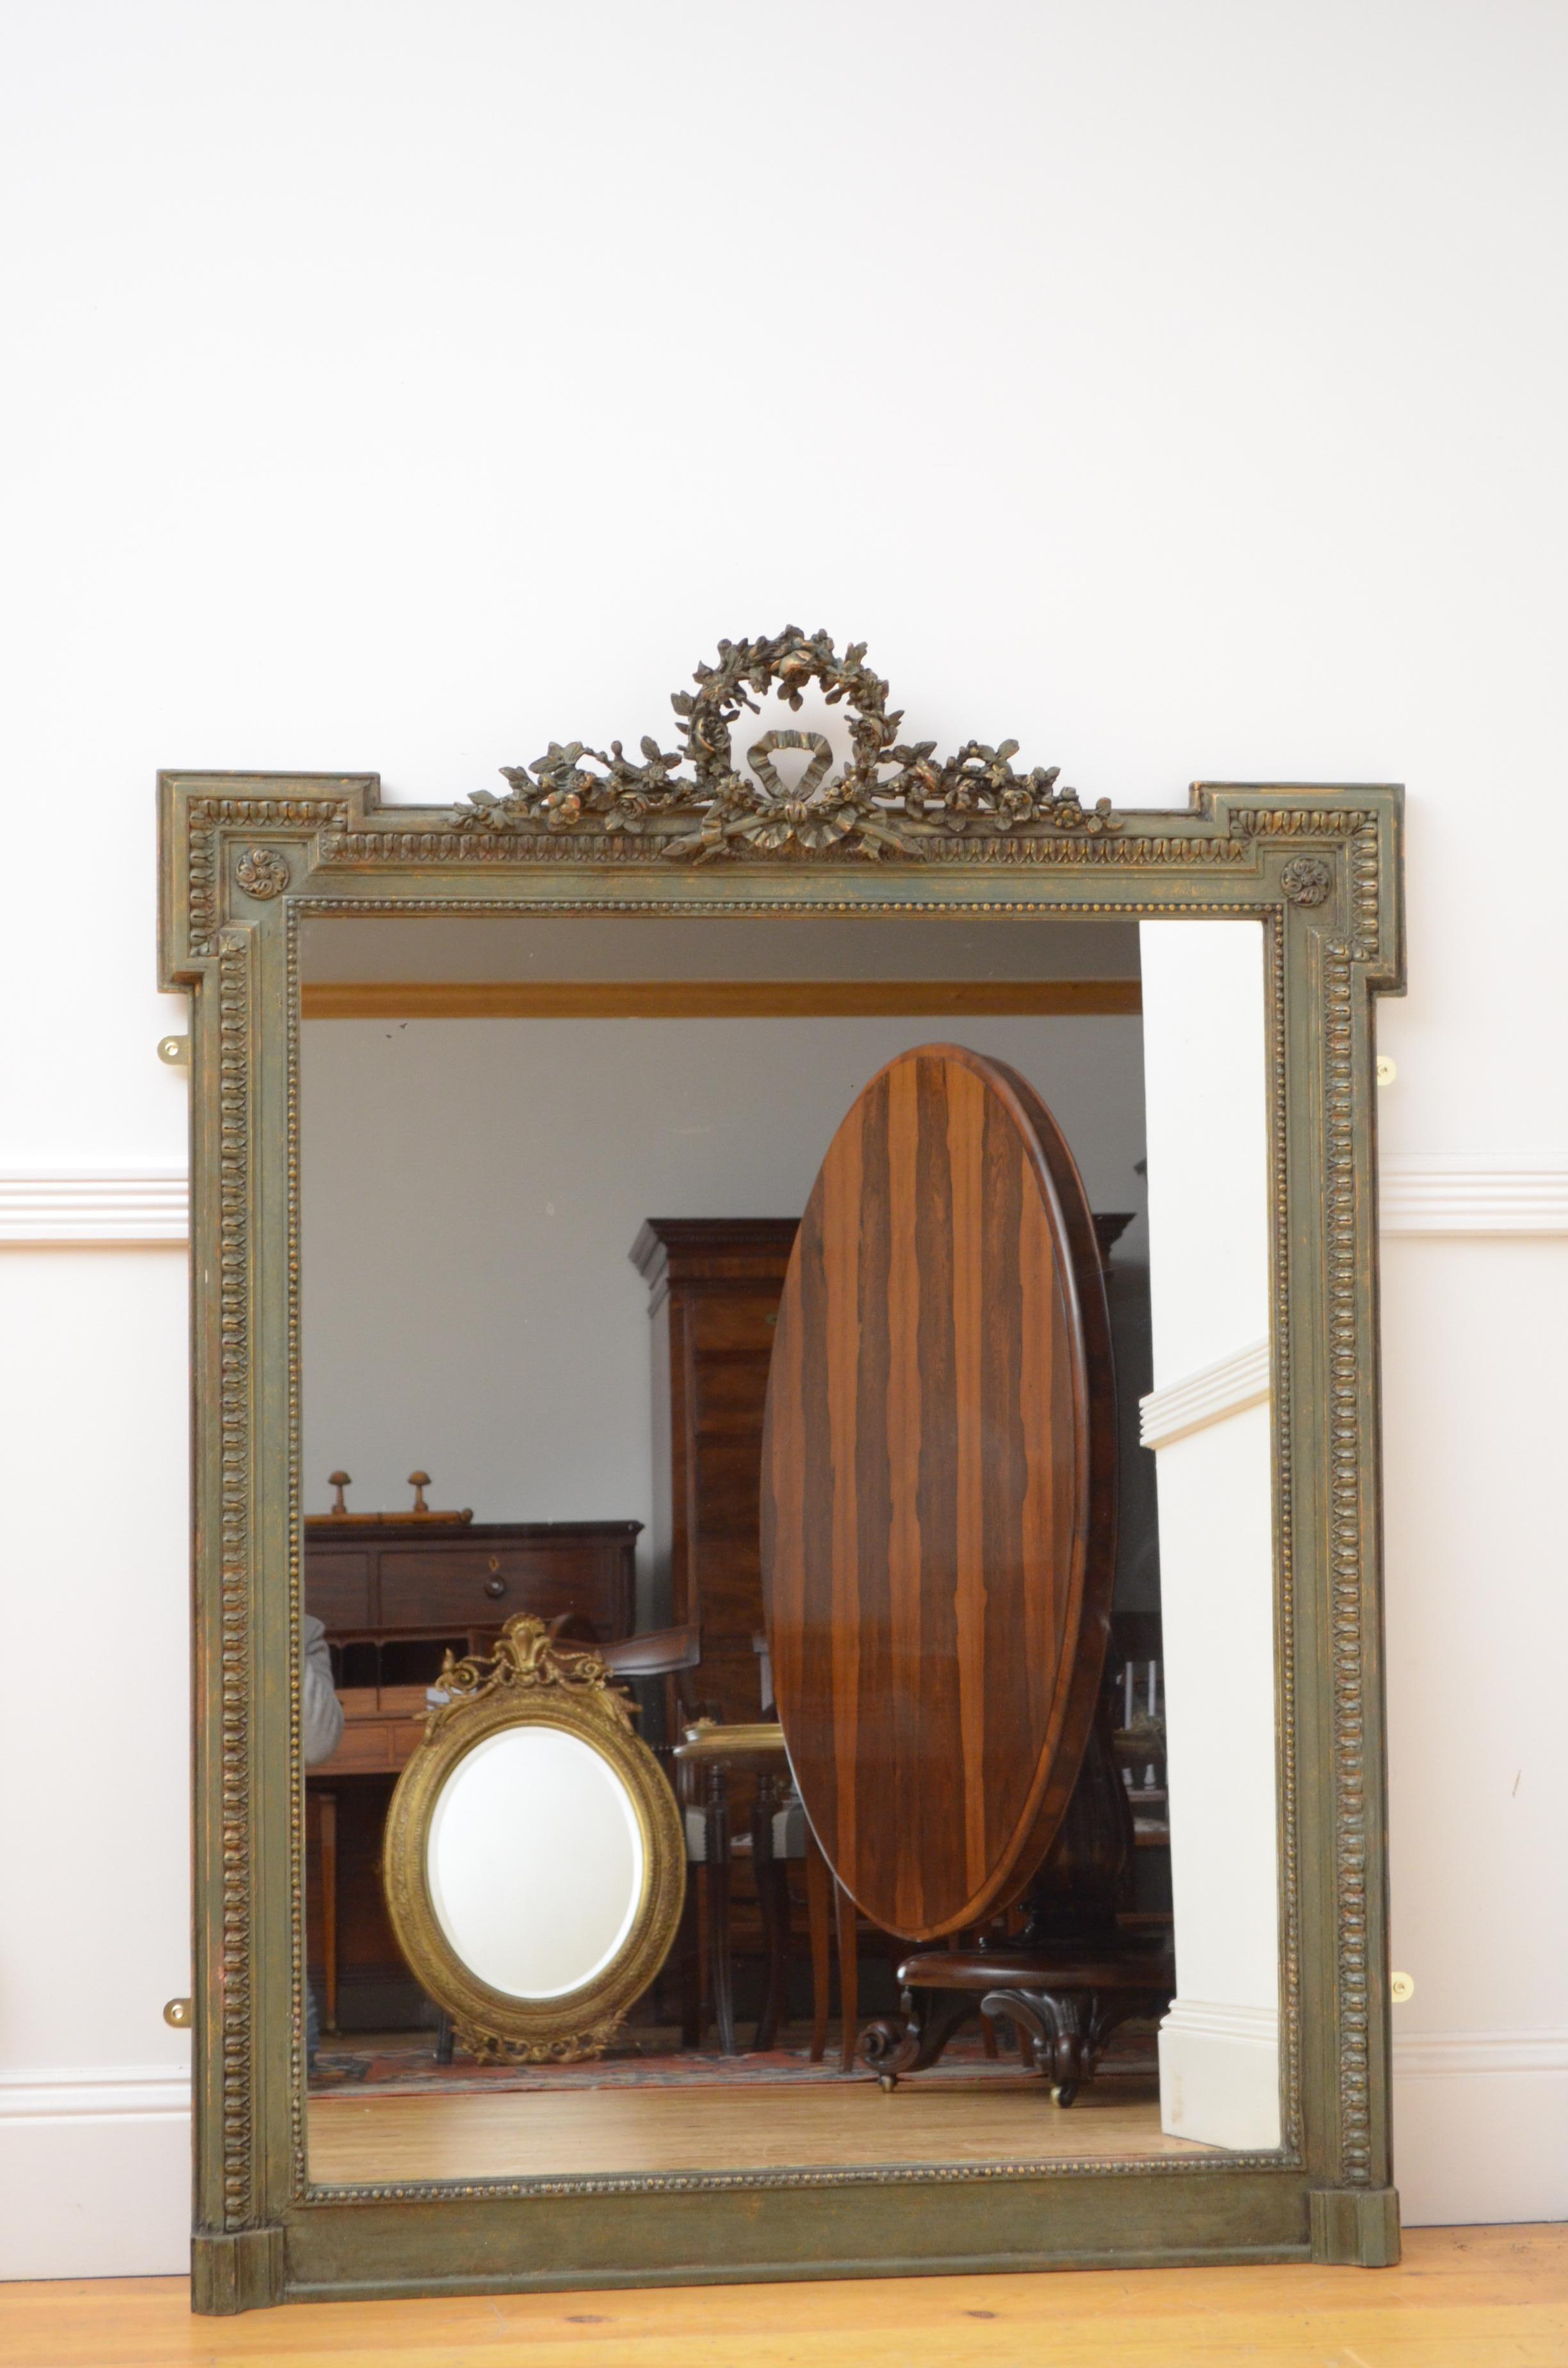 K0055 very attractive olive green wall mirror, having original glass with some foxing in gilded and green painted frame with centre crest to the top. This antique mirror is in excellent home ready condition, circa 1880
Measures: H 54.5